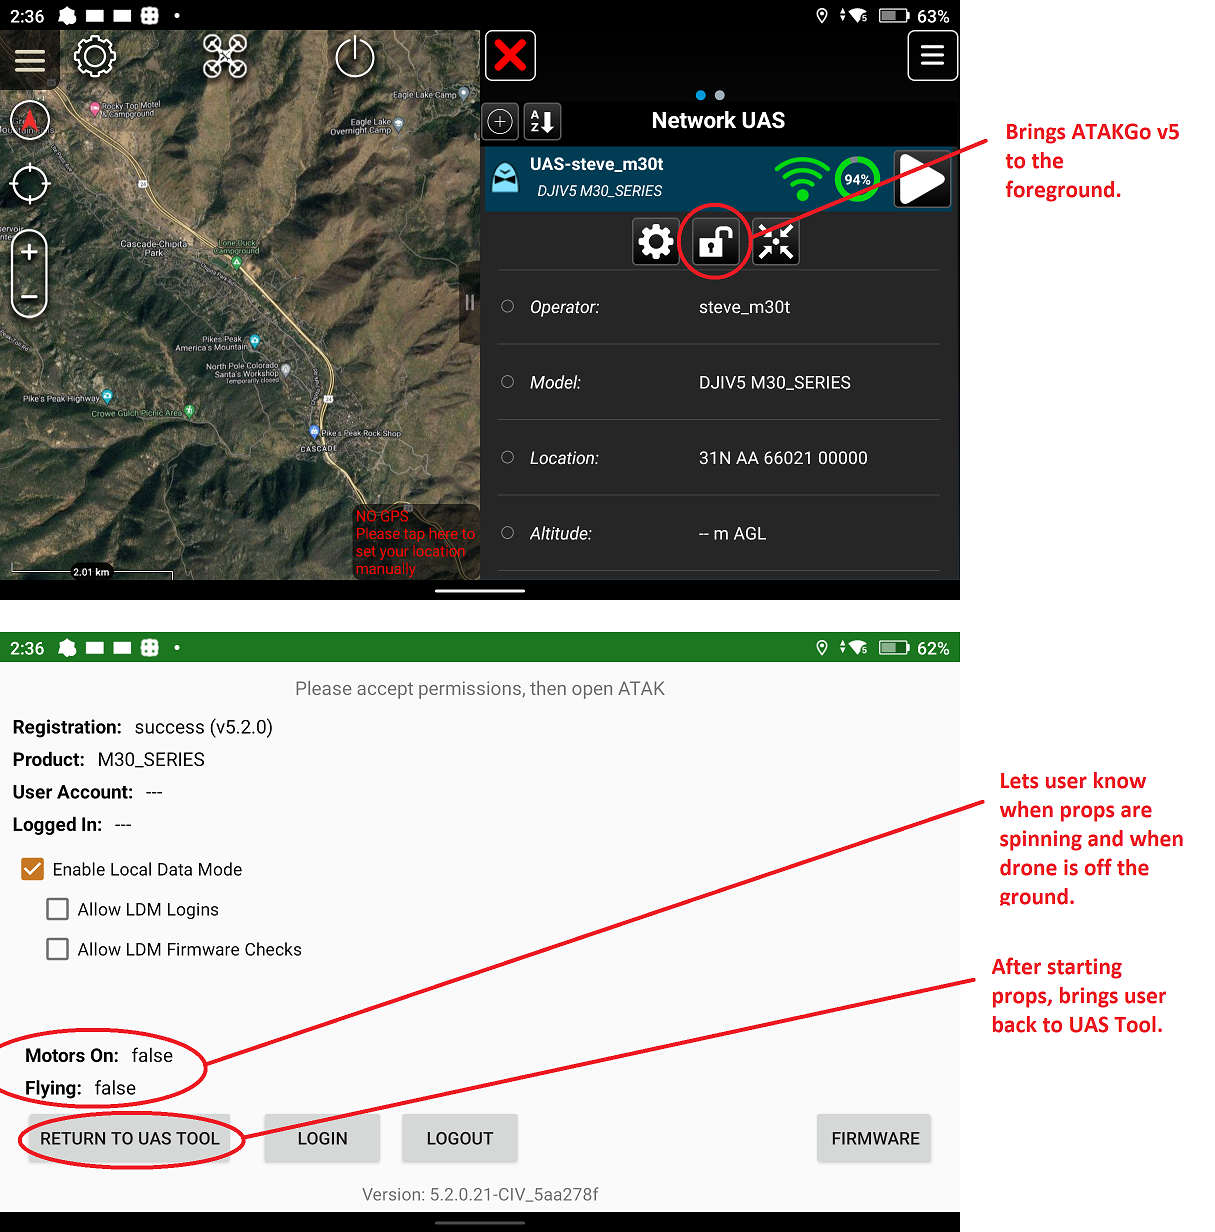 UAS Tool Screenshot showing ATAKGo v5, Lets users know when props are spinning and when drone is off the ground. 